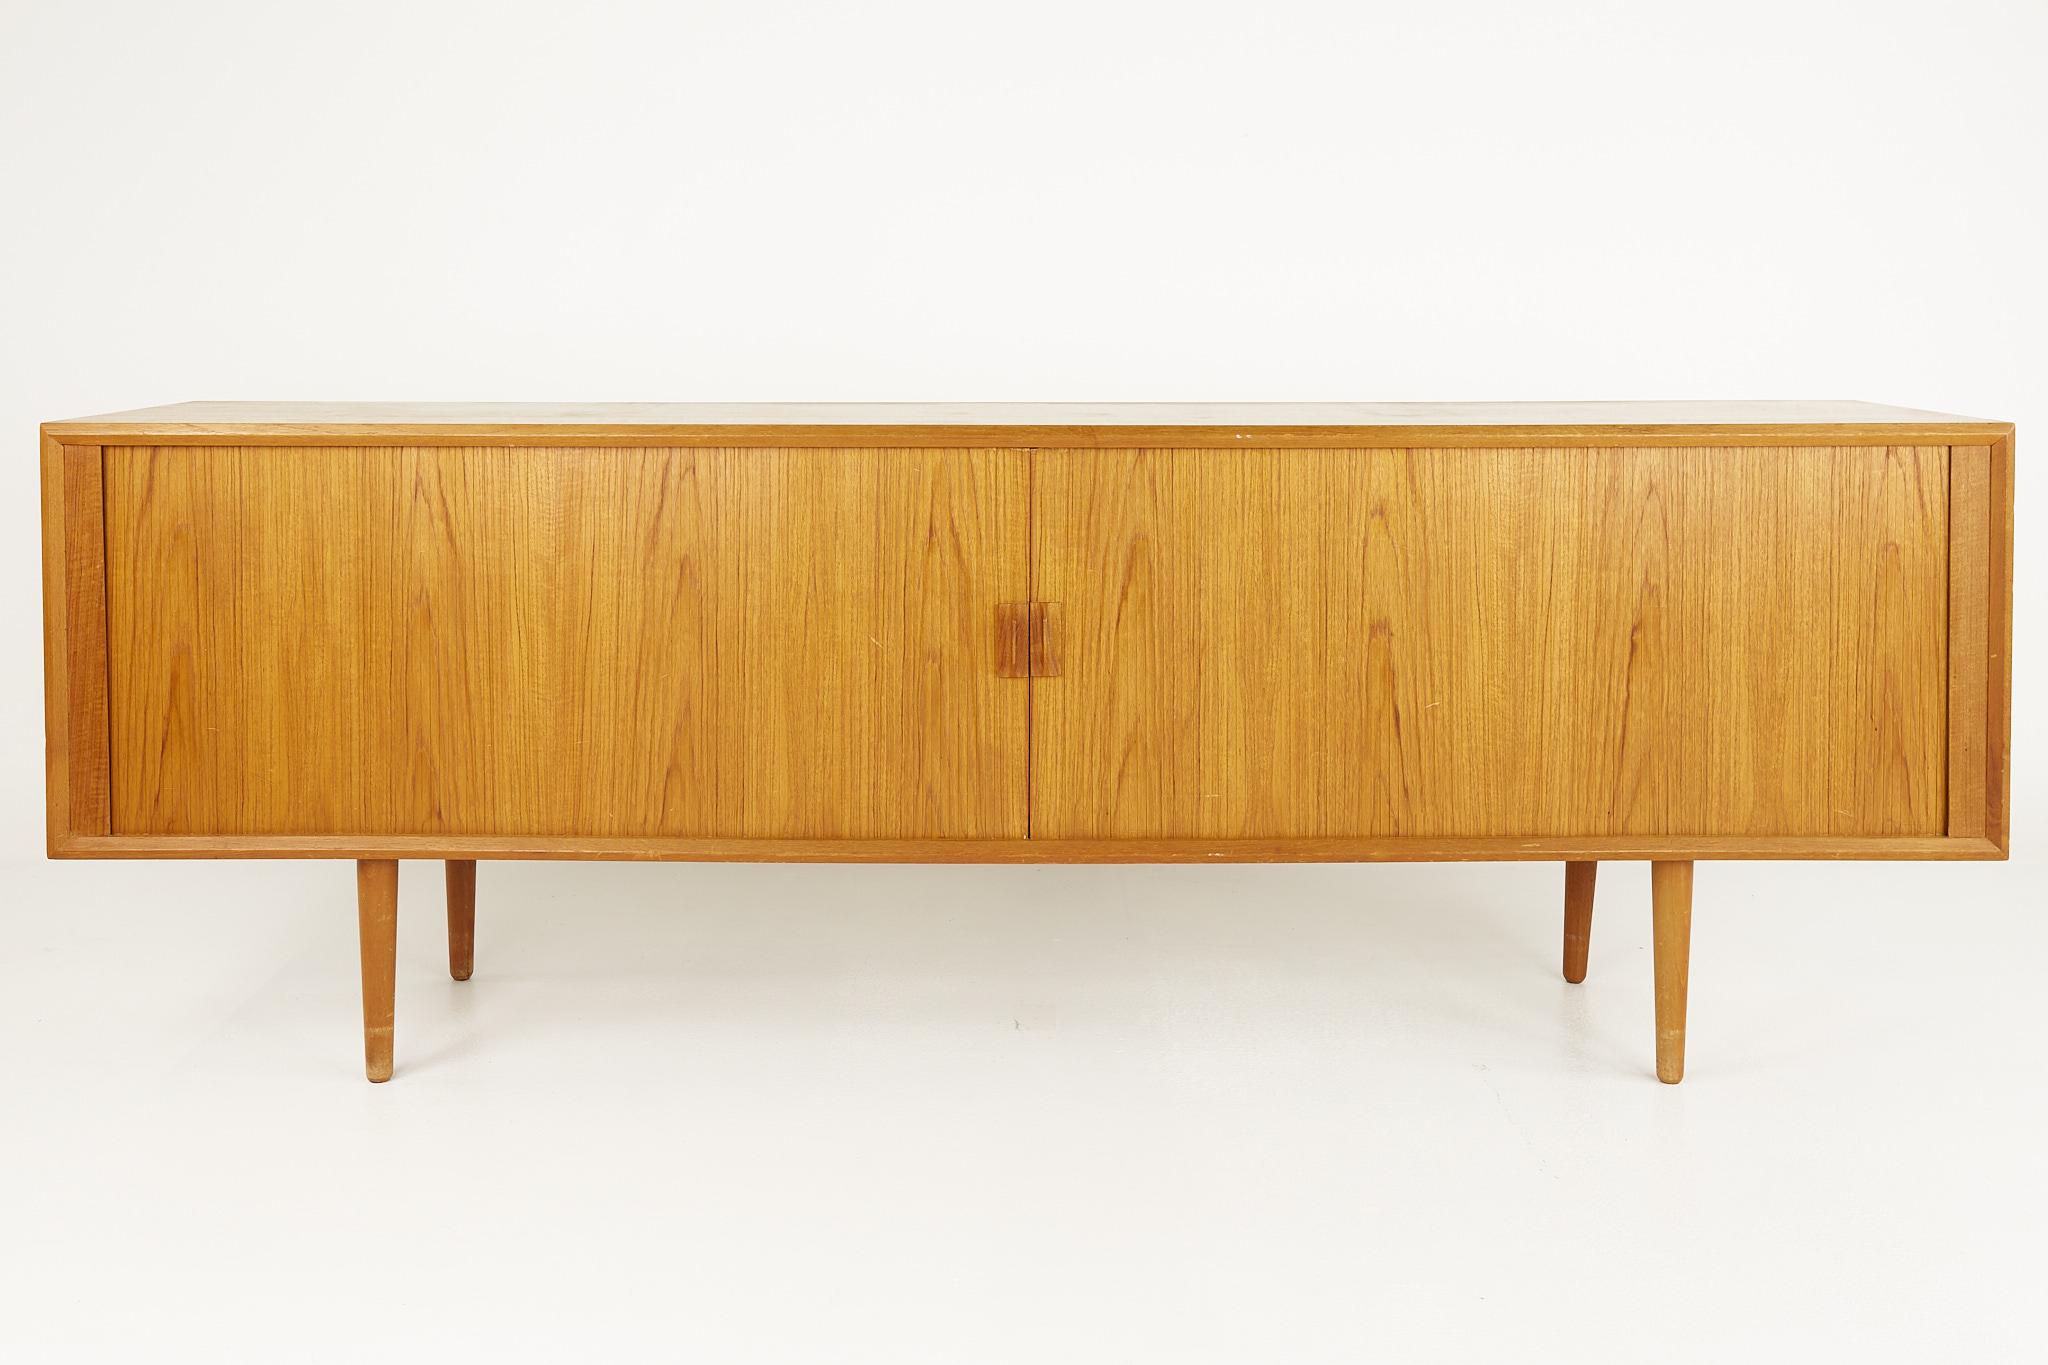 Svend Aage Larsen mid century teak tambour door long sideboard buffet credenza

This credenza measures: 90.5 wide x 19 deep x 31.25 inches high

?All pieces of furniture can be had in what we call restored vintage condition. That means the piece